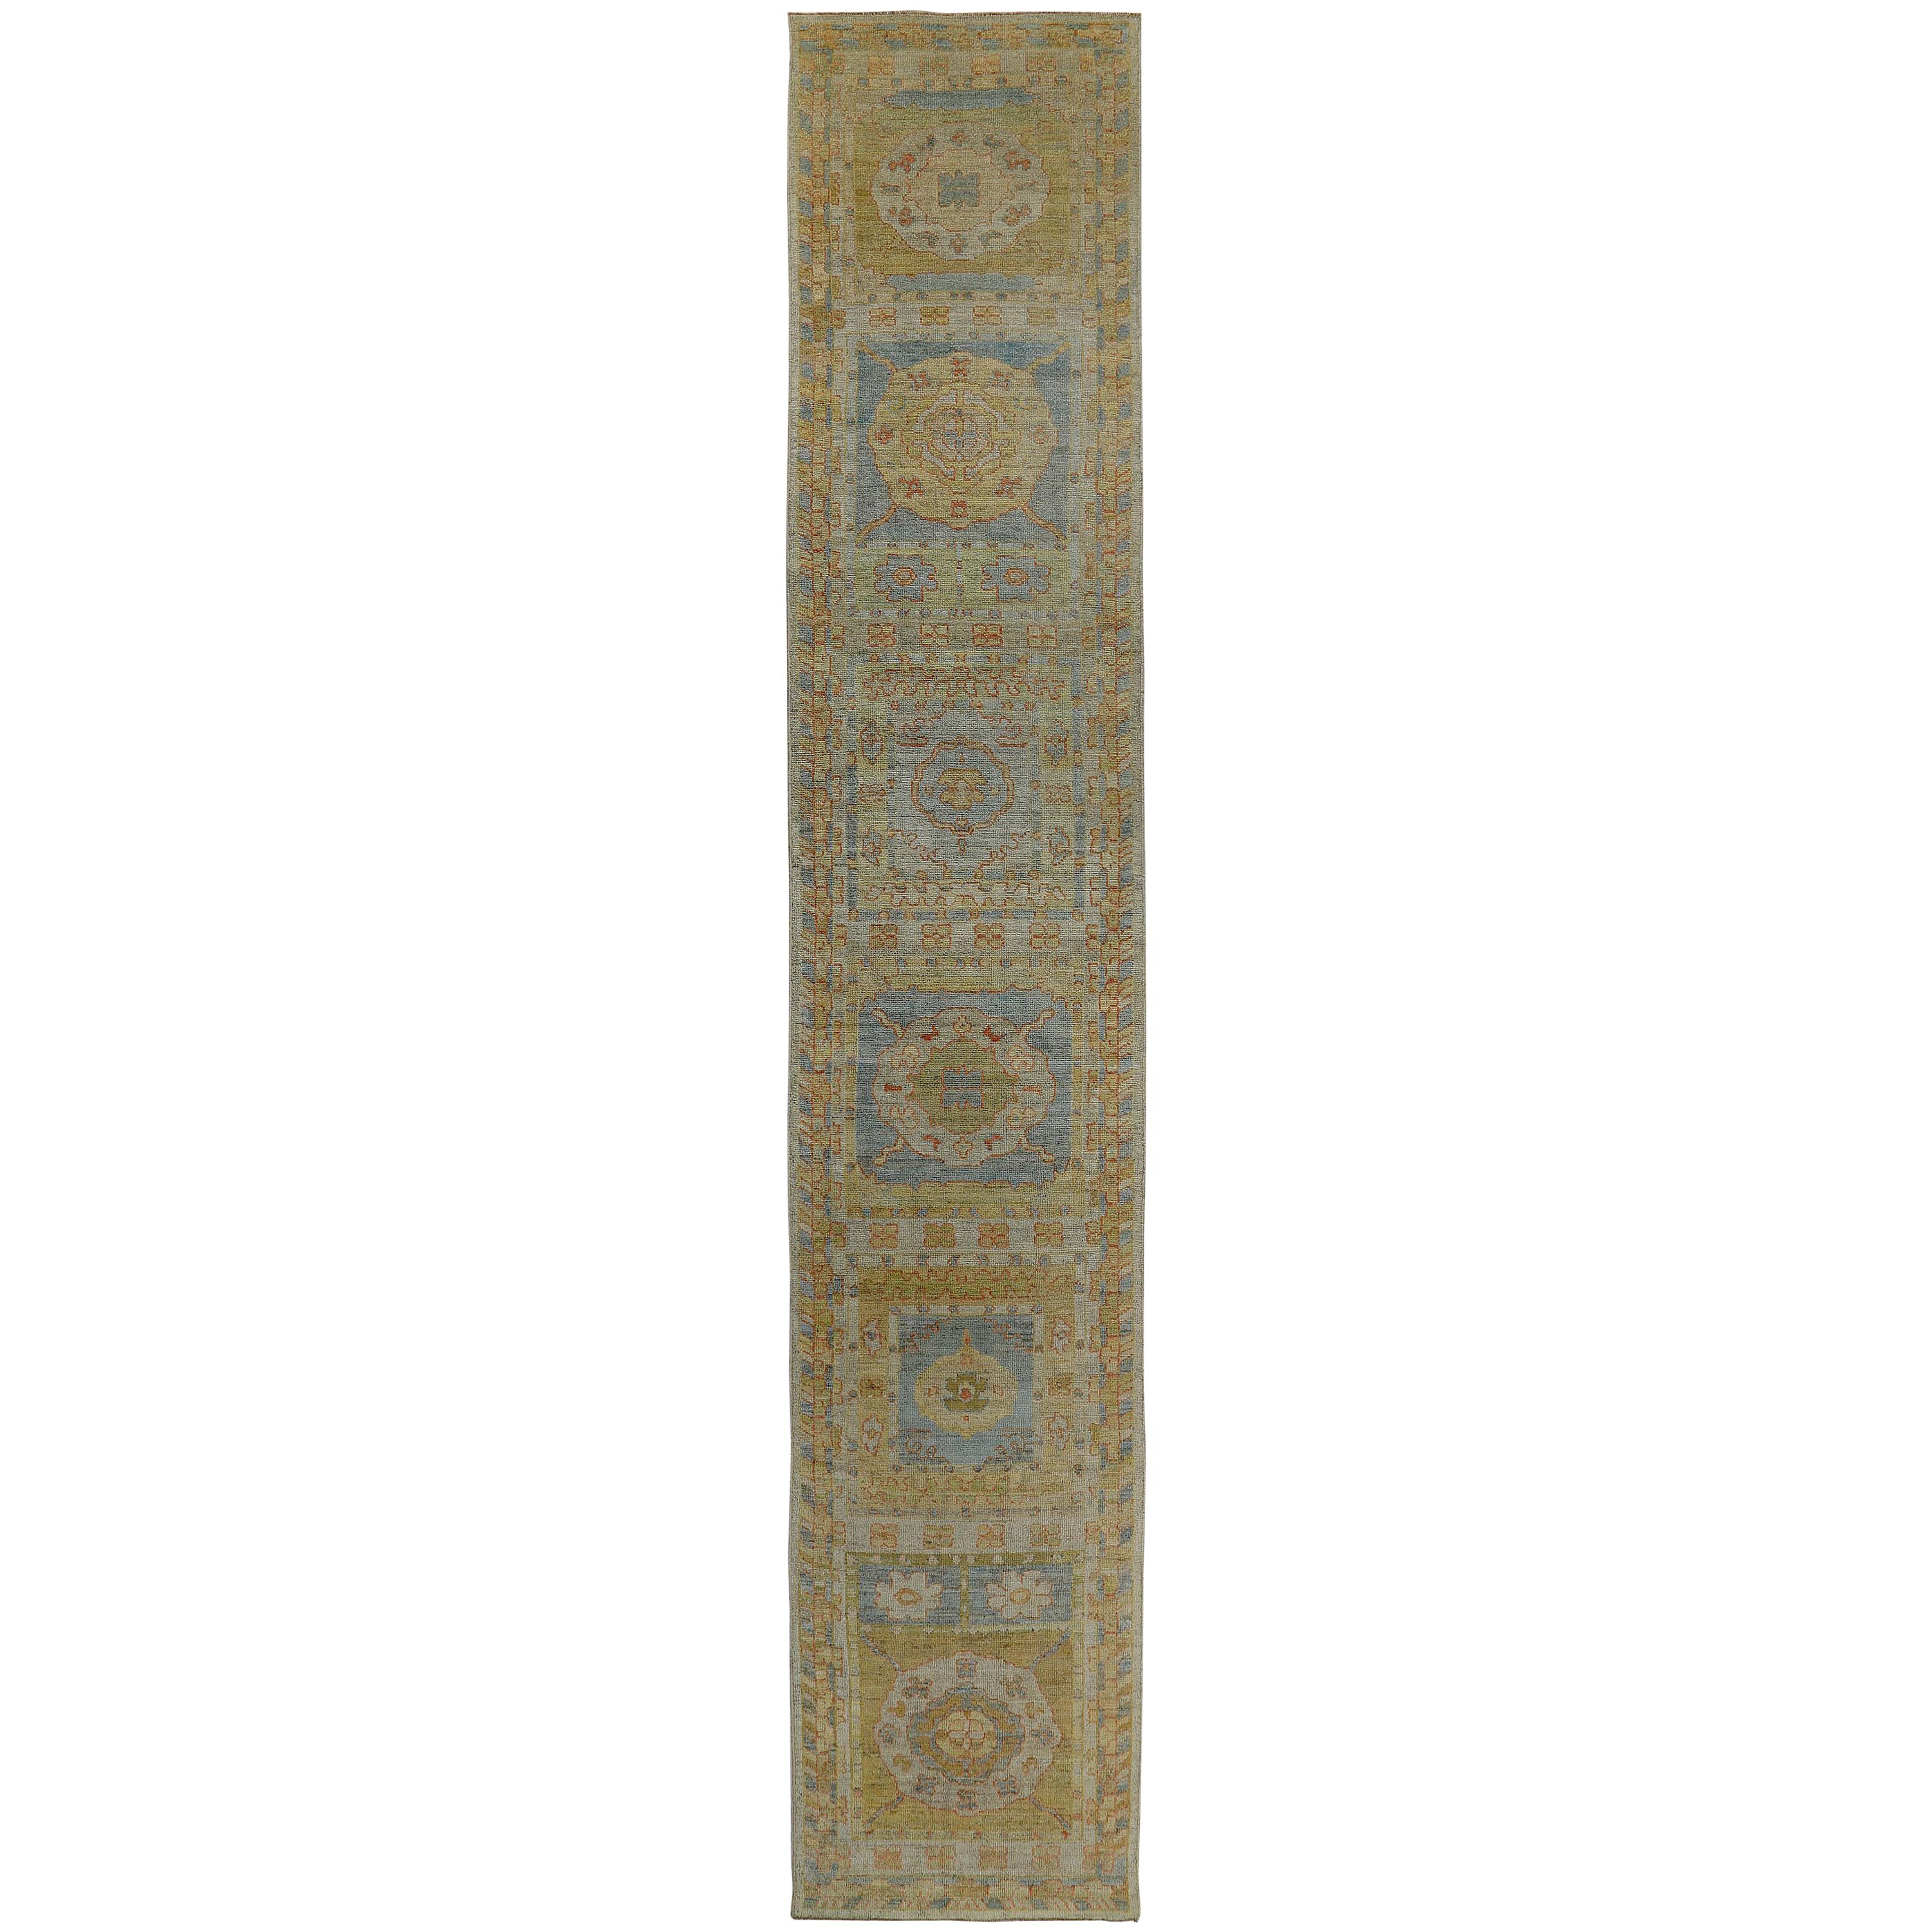 New Turkish Oushak Runner Rug with Blue and Green Floral Details on Yellow Field For Sale